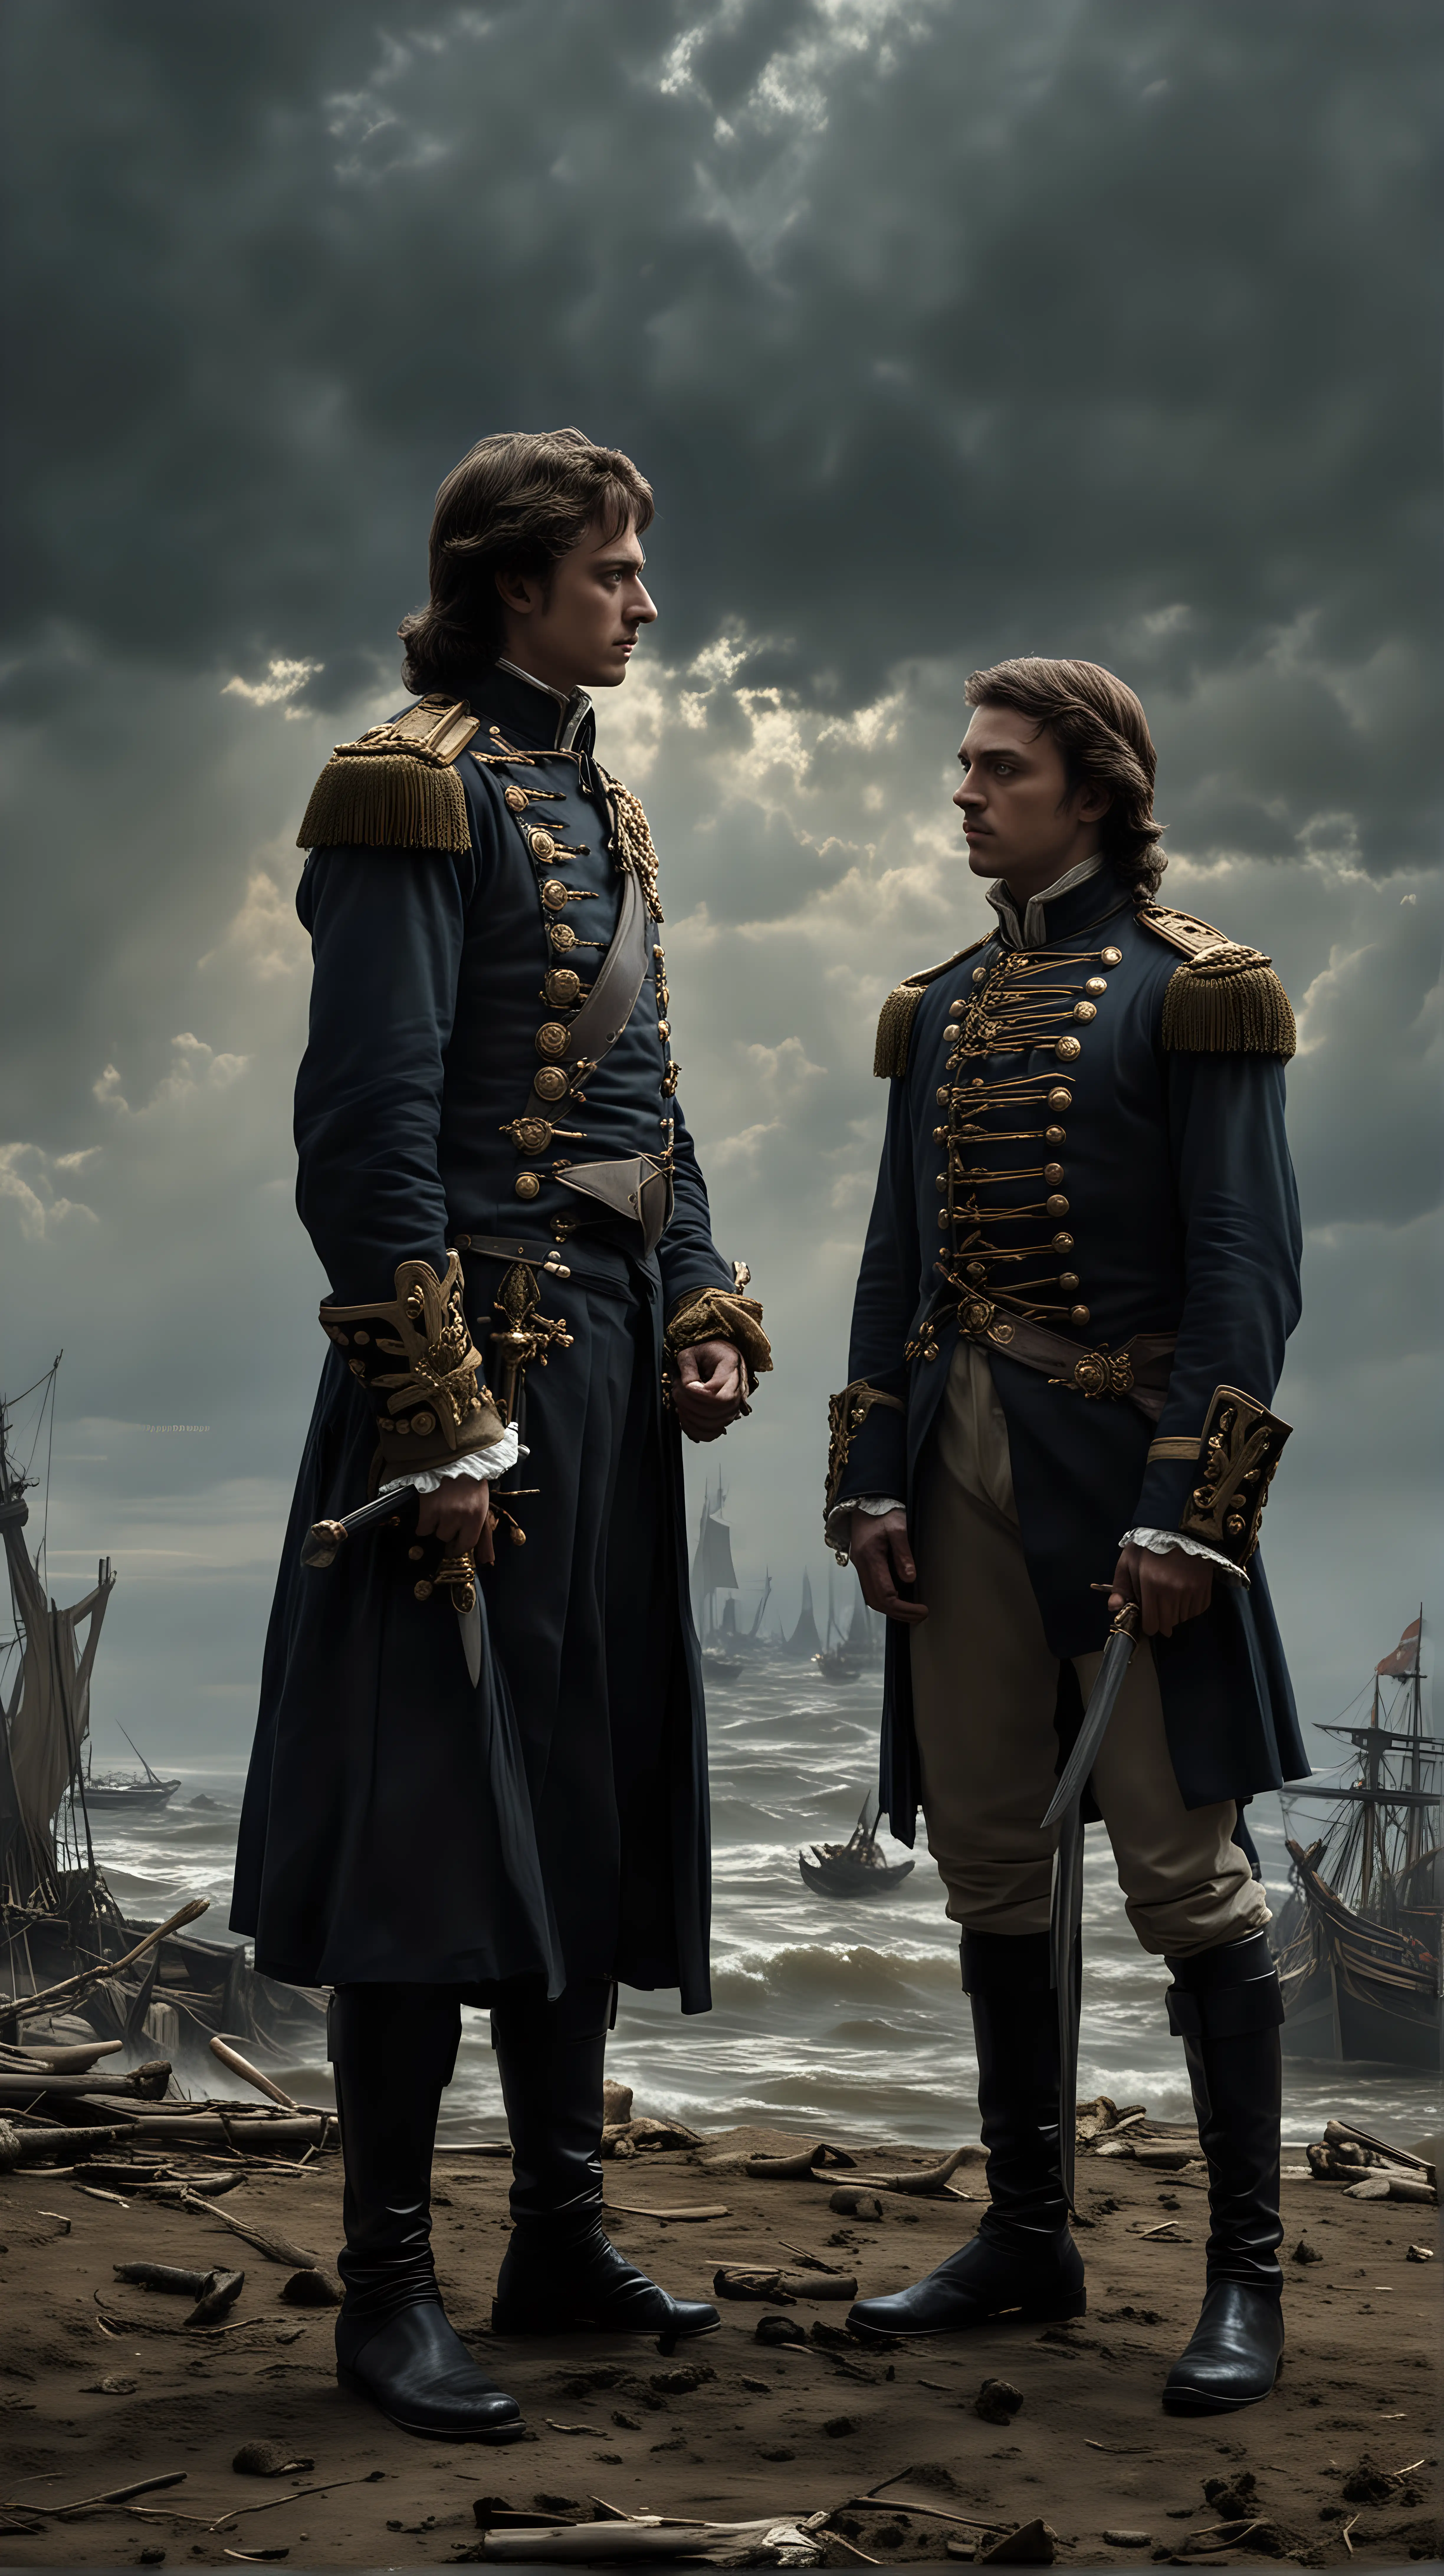 Create an intense scene where Peter the Great and his son Alexei are depicted staring at each other like enemies. Peter stands tall and authoritative, his expression a mixture of disappointment and determination, while Alexei glares back with defiance and resentment, embodying the tension and conflict that exists between them. The setting should reflect the somber atmosphere of their strained relationship, with shadows looming in the background to symbolize the darkness that has enveloped their familial bond. (1718)